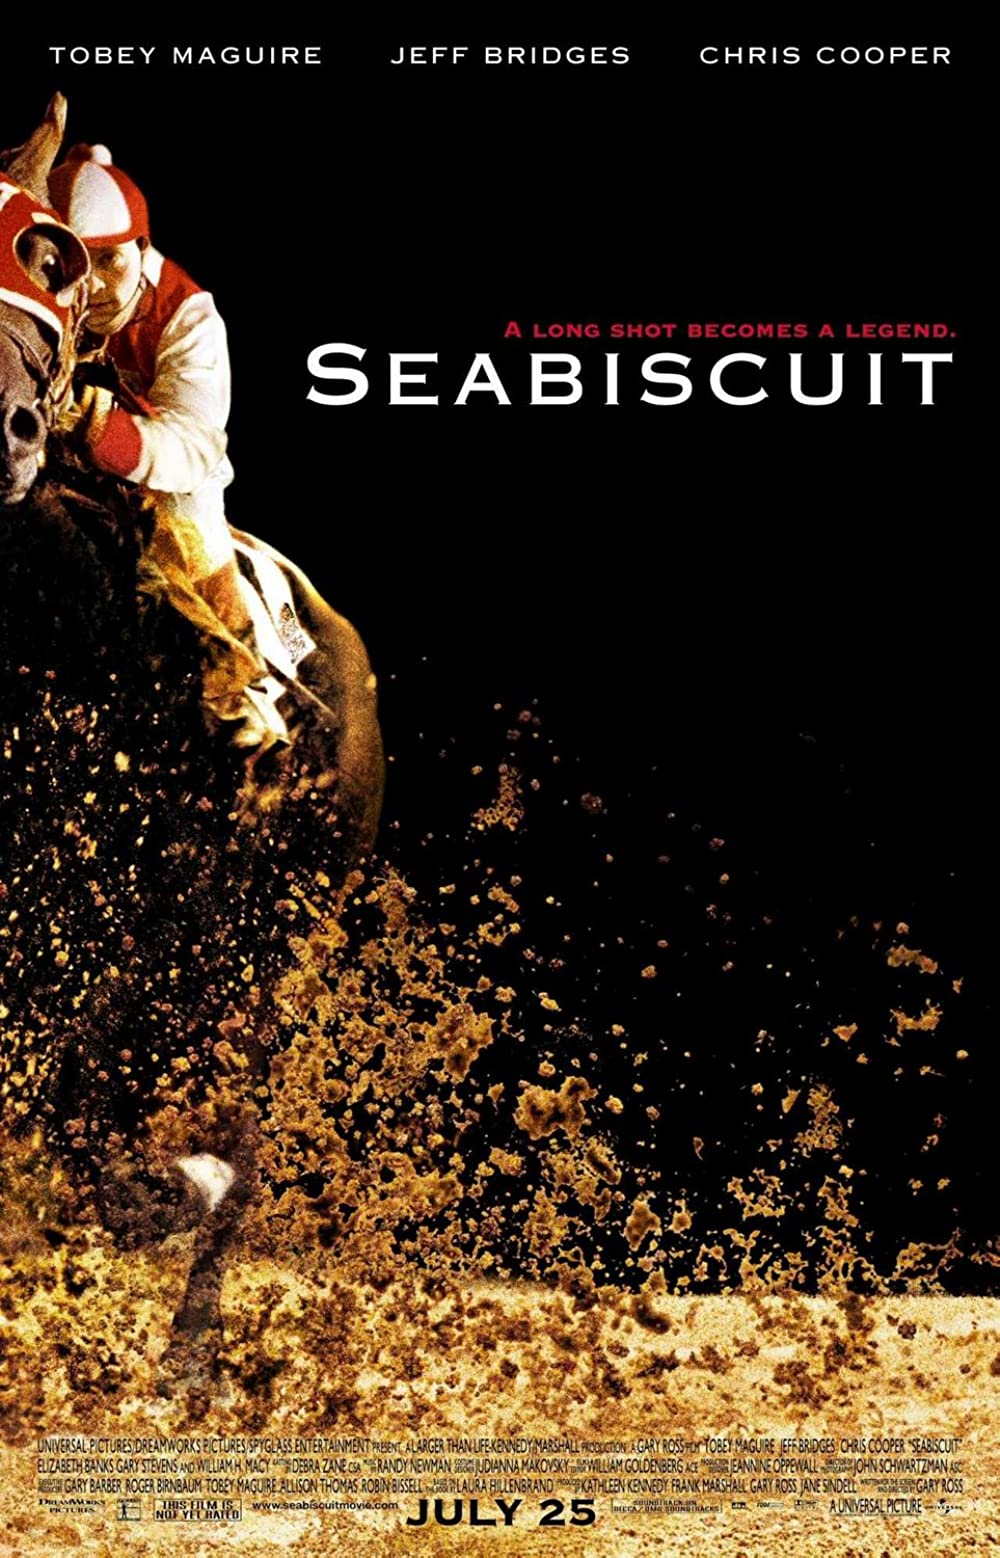 Seabiscuit 2003 Movie Poster